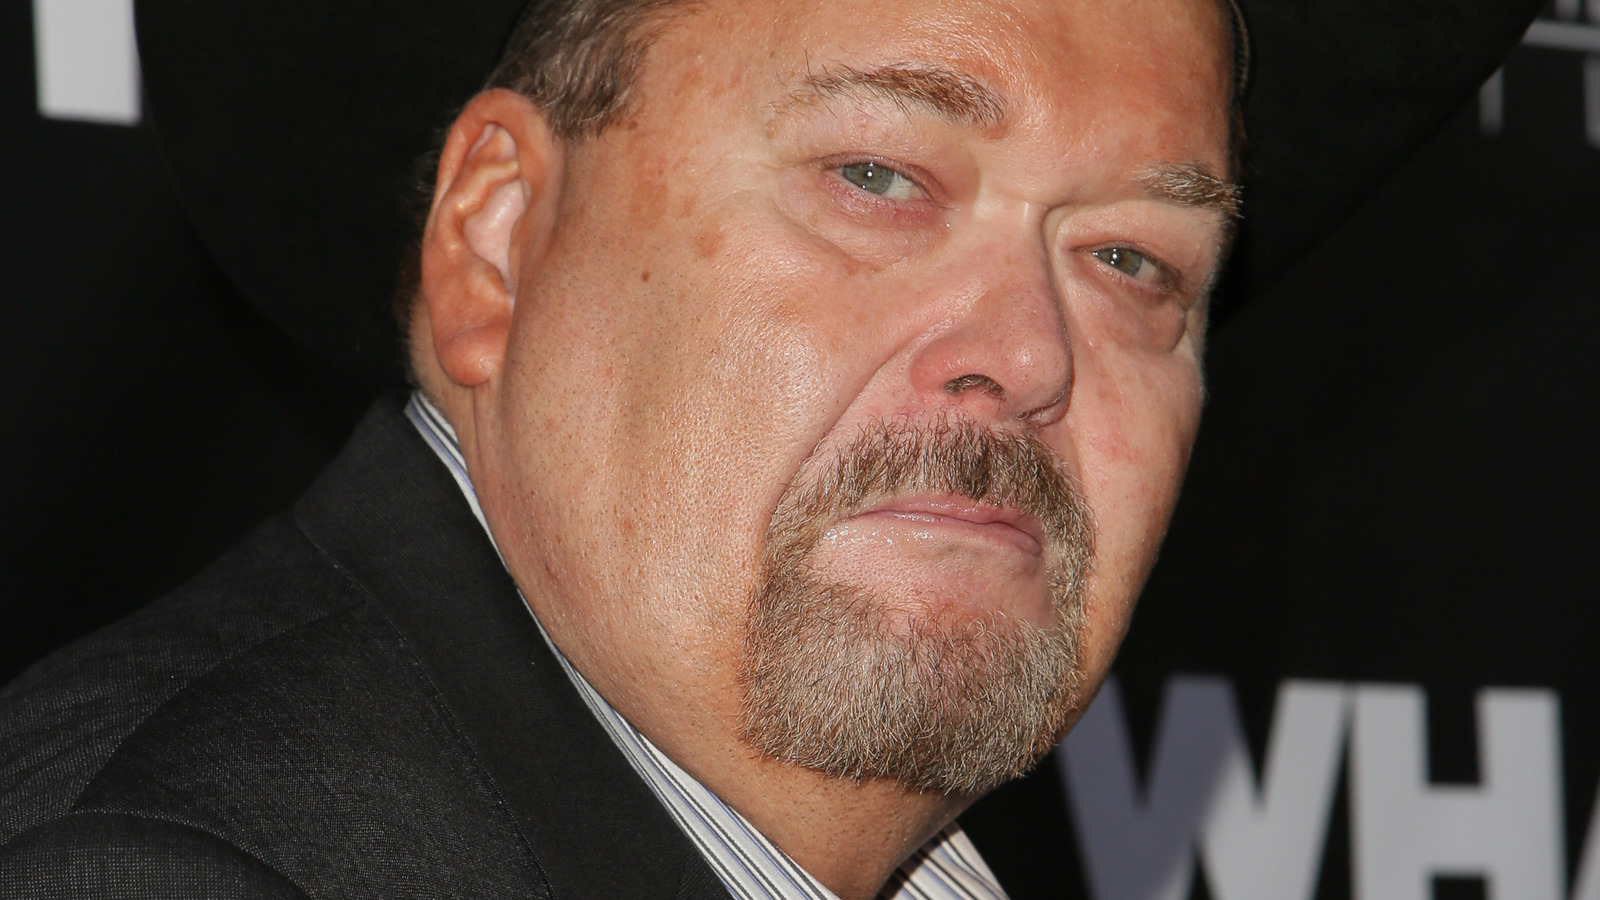 Jim Ross' Current AEW Contract Reportedly Expiring Soon